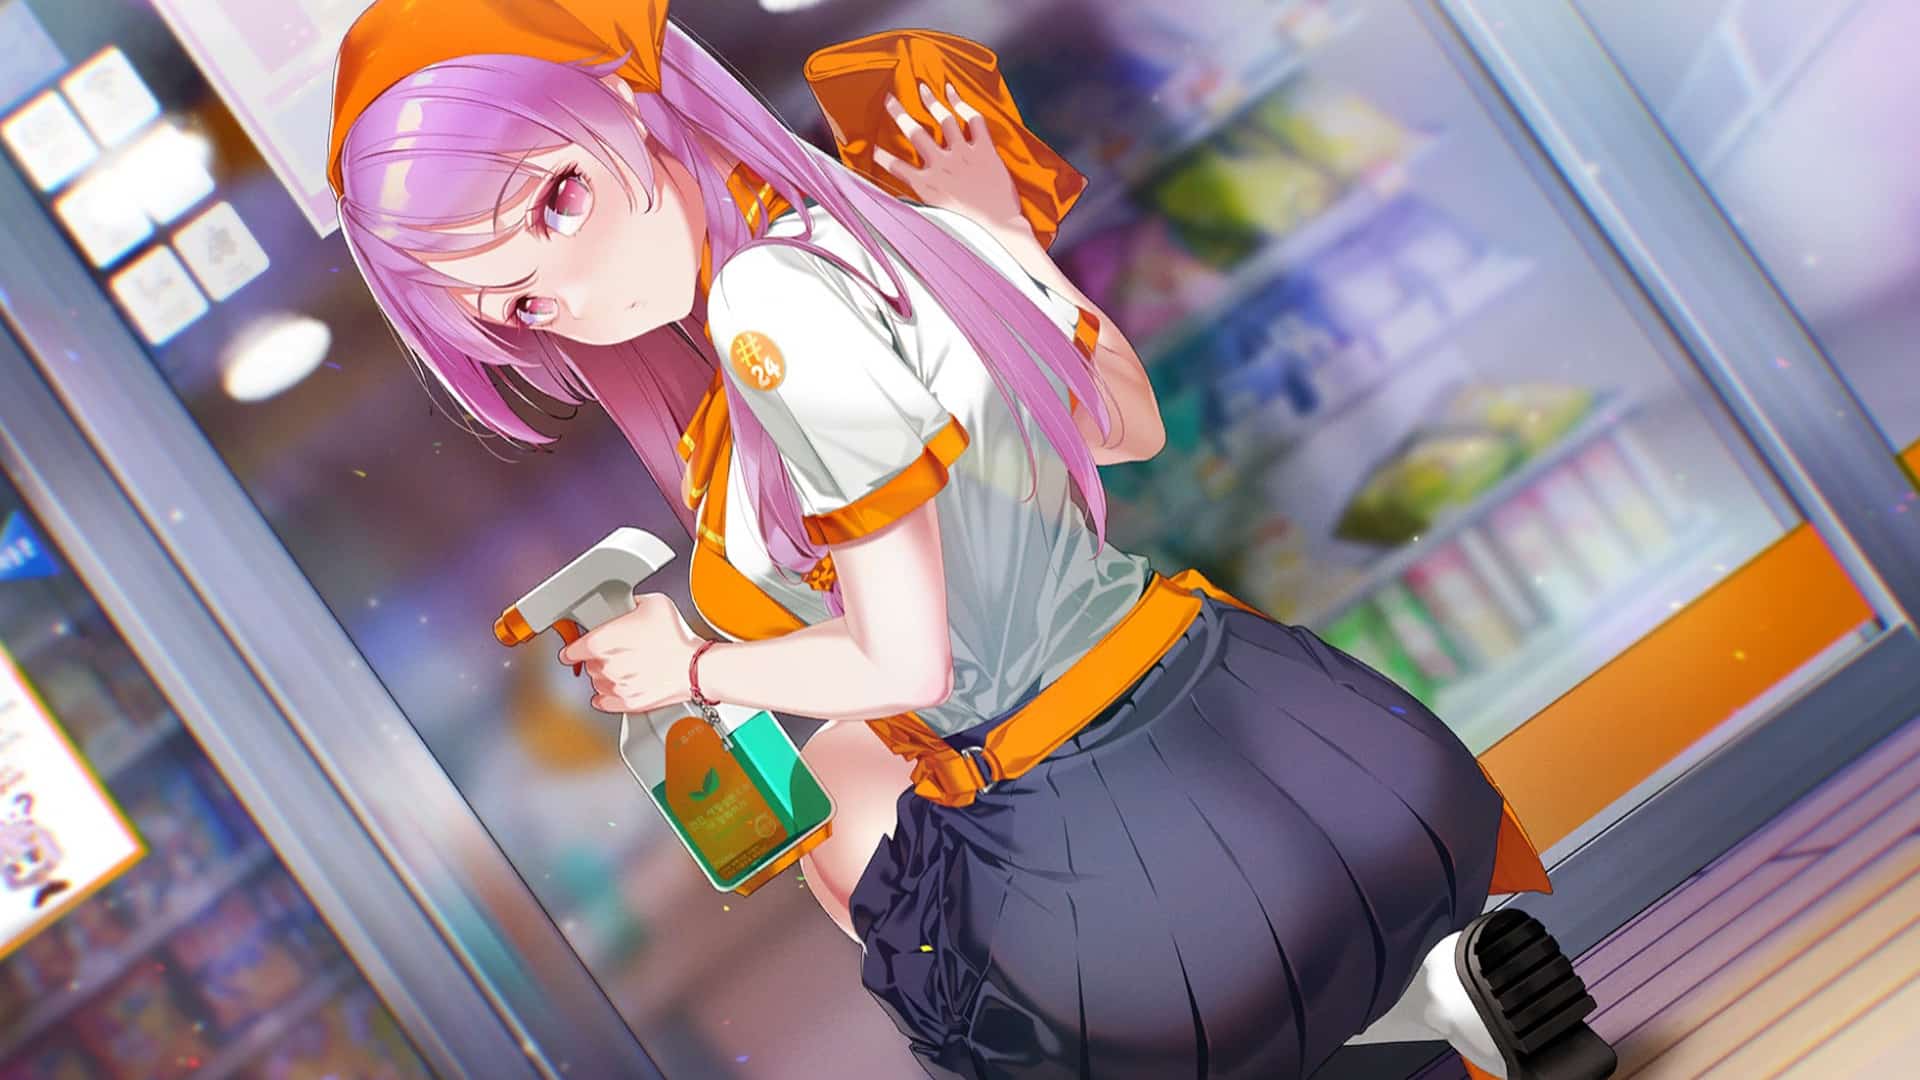 Adventure Visual Novel ‘Some Some Convenience Store’ Coming to Switch; New Trailer Streaming